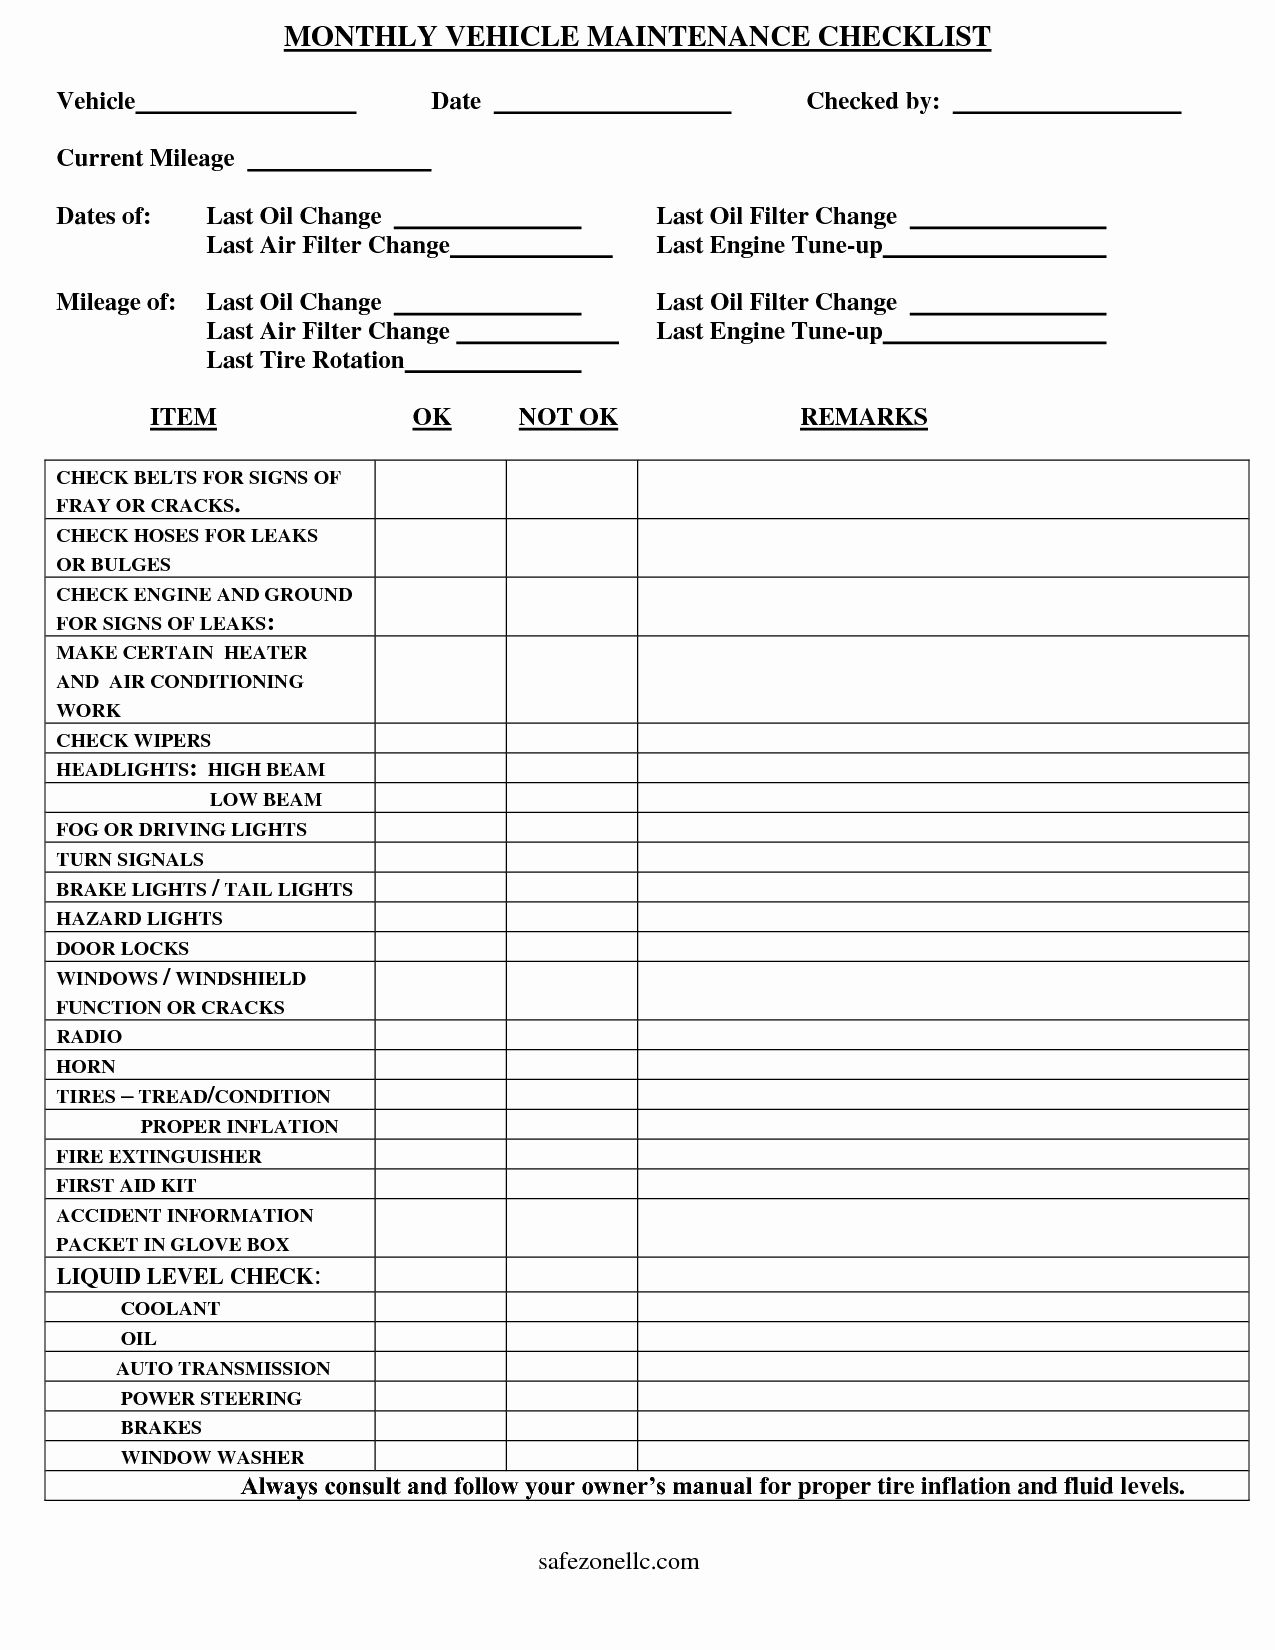 10 Car Maintenance Schedule Throughout Automotive Service Checklist Template Intended For Automotive Service Checklist Template